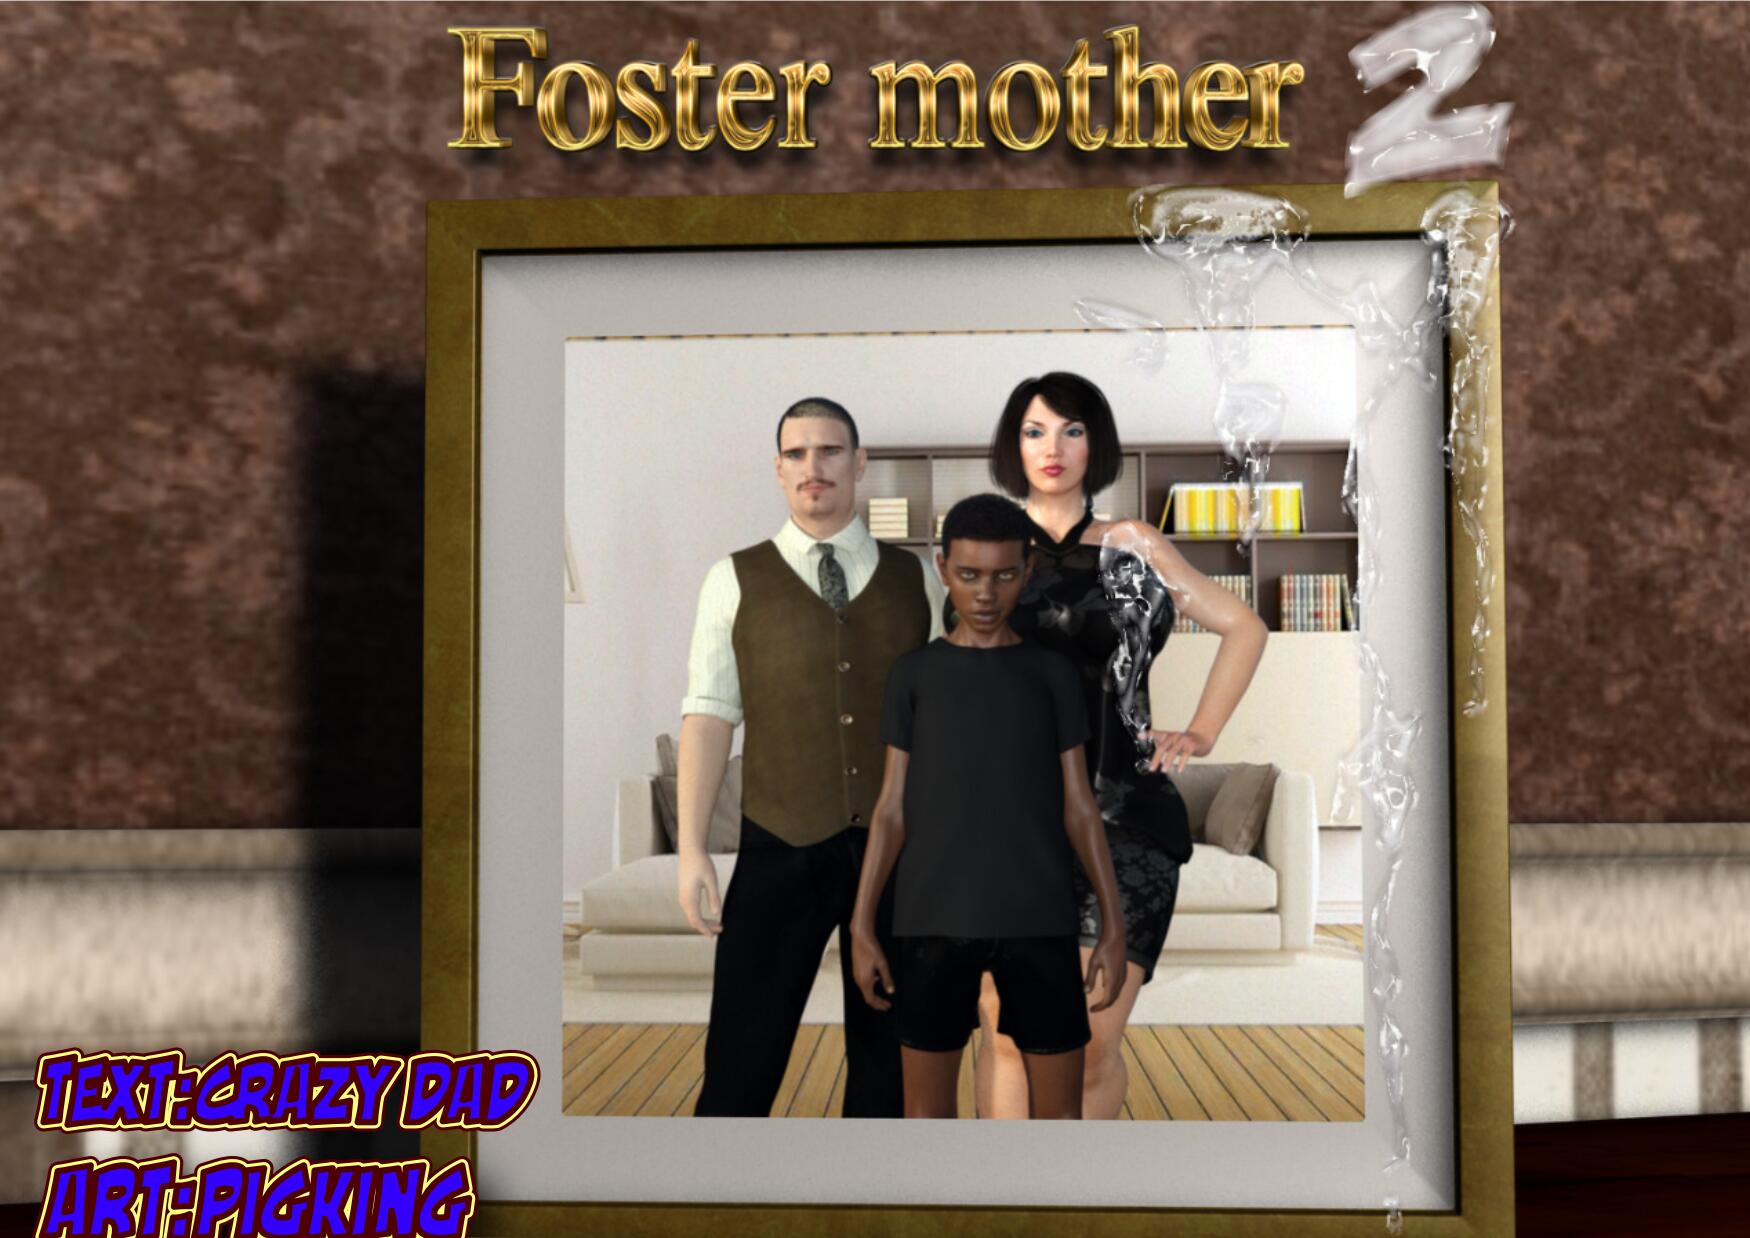 Foster Mother 2 by Pig King